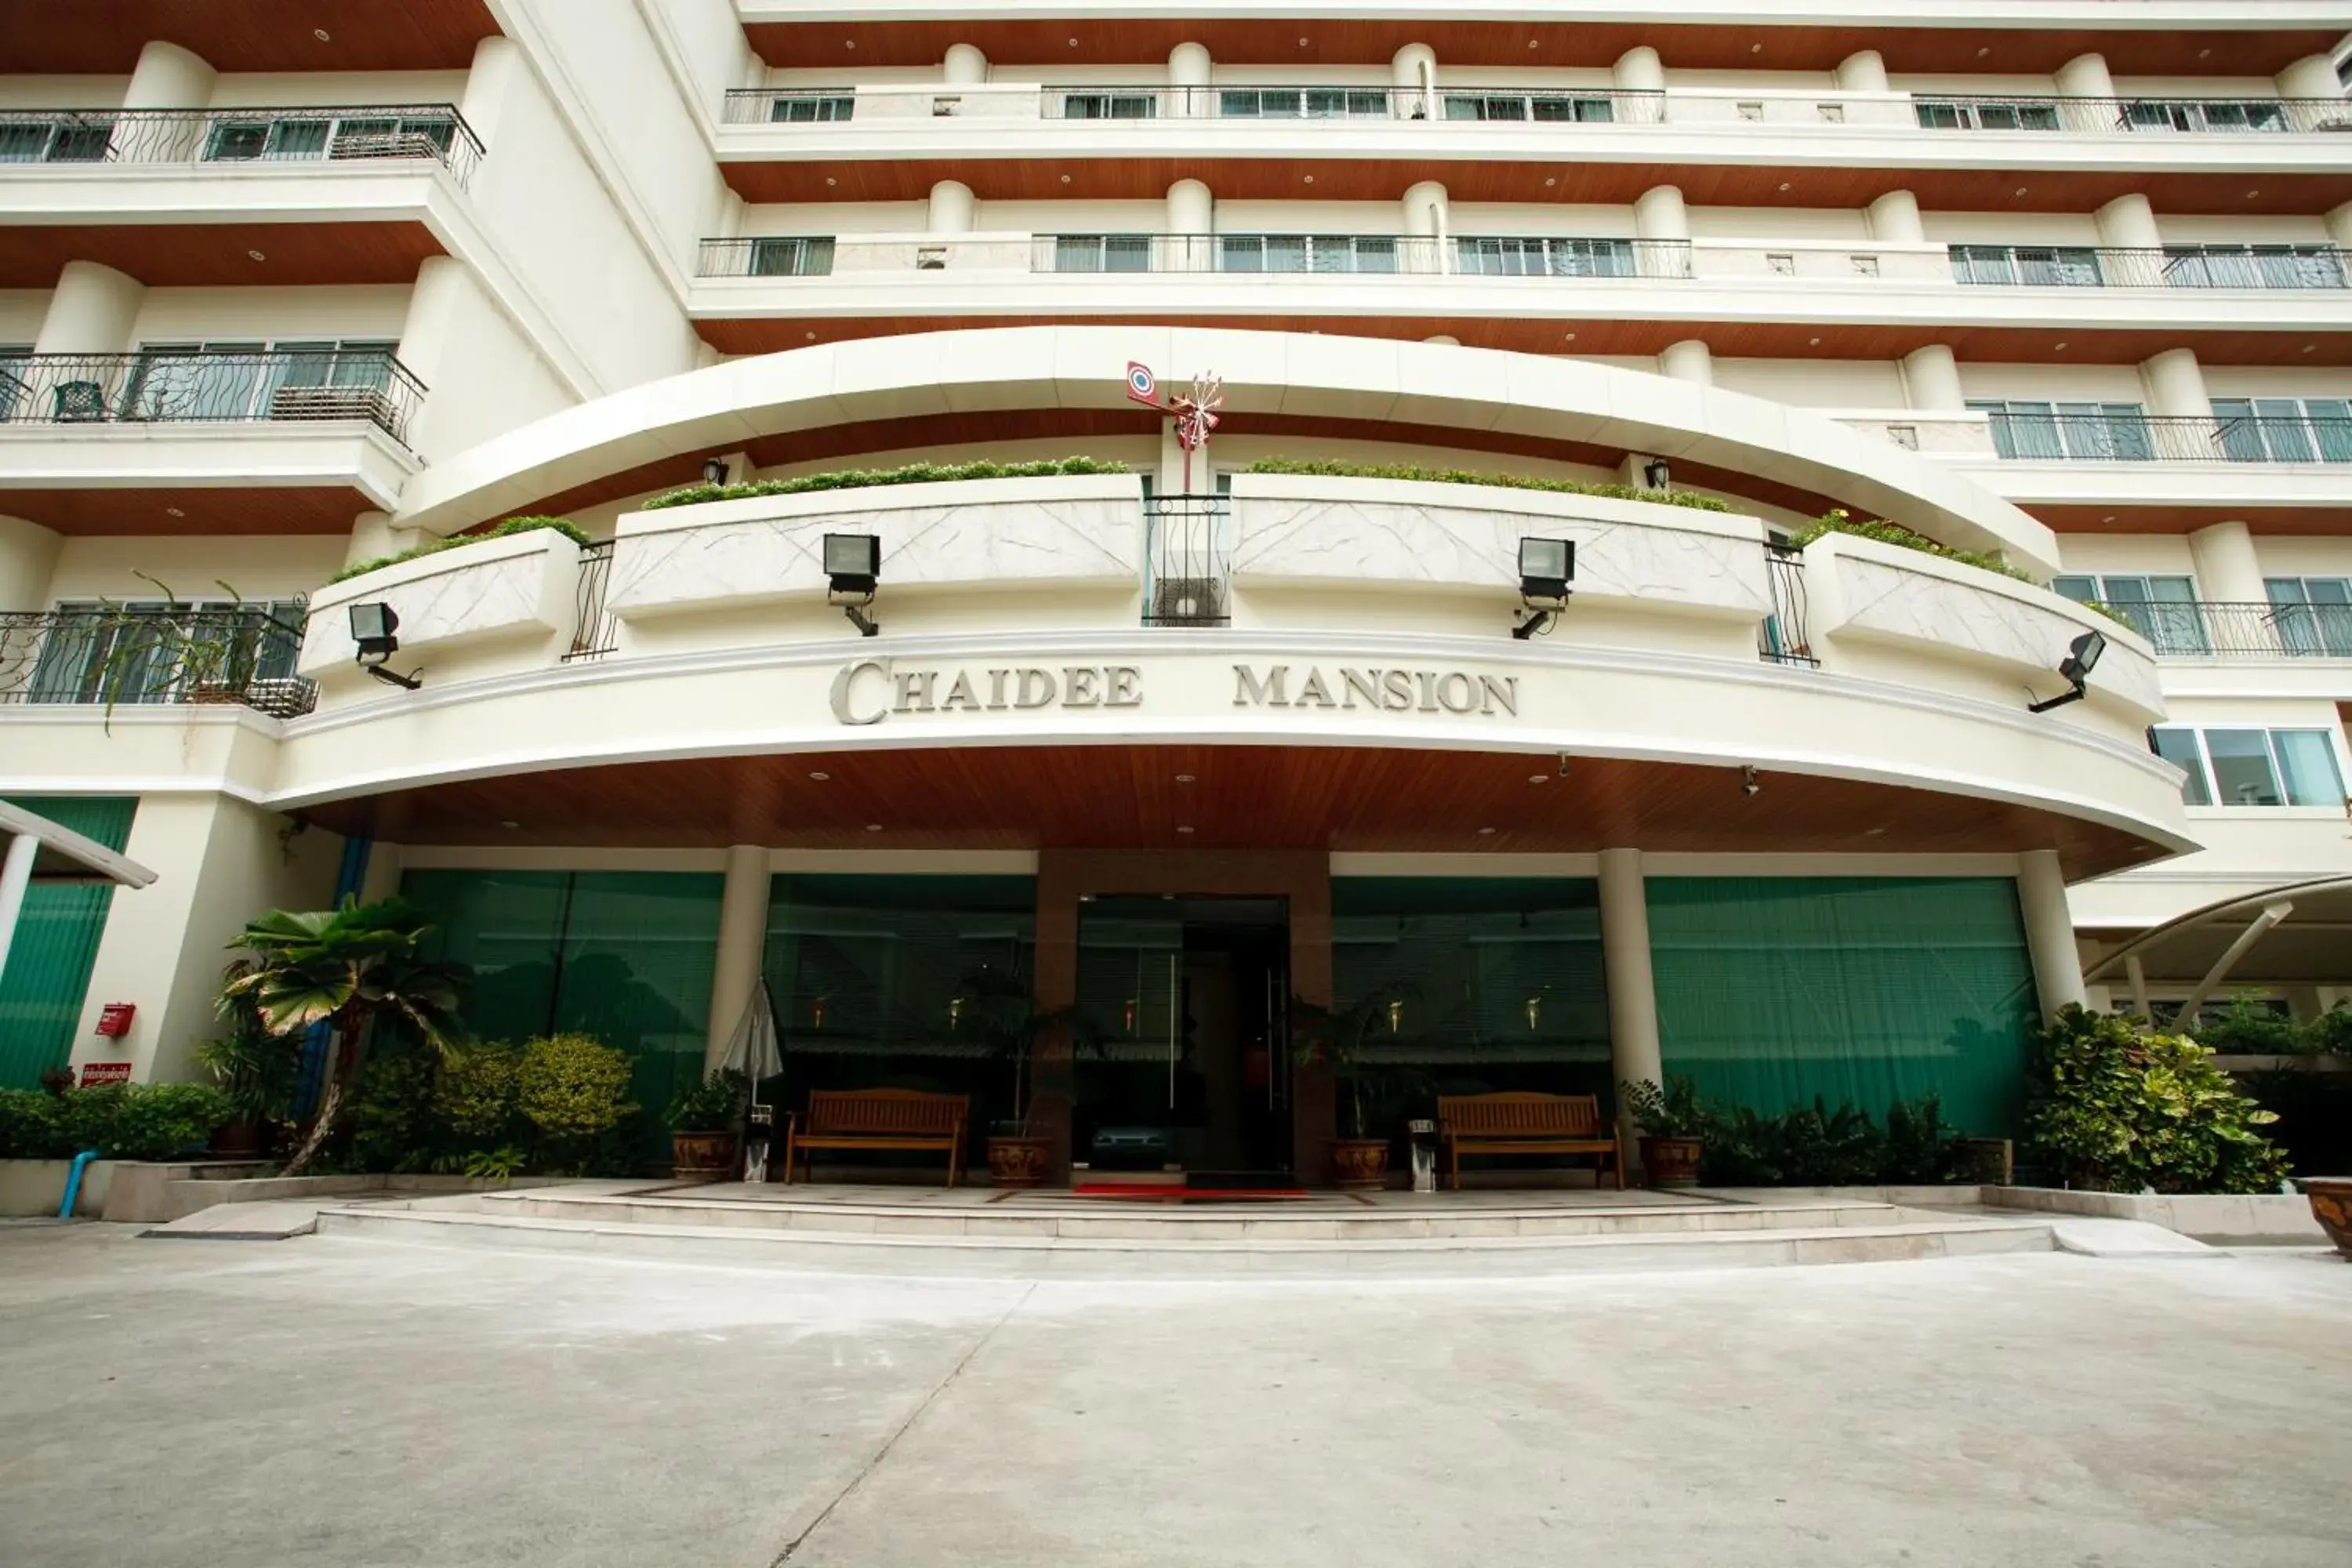 Facade/entrance, Property Building in Chaidee Mansion